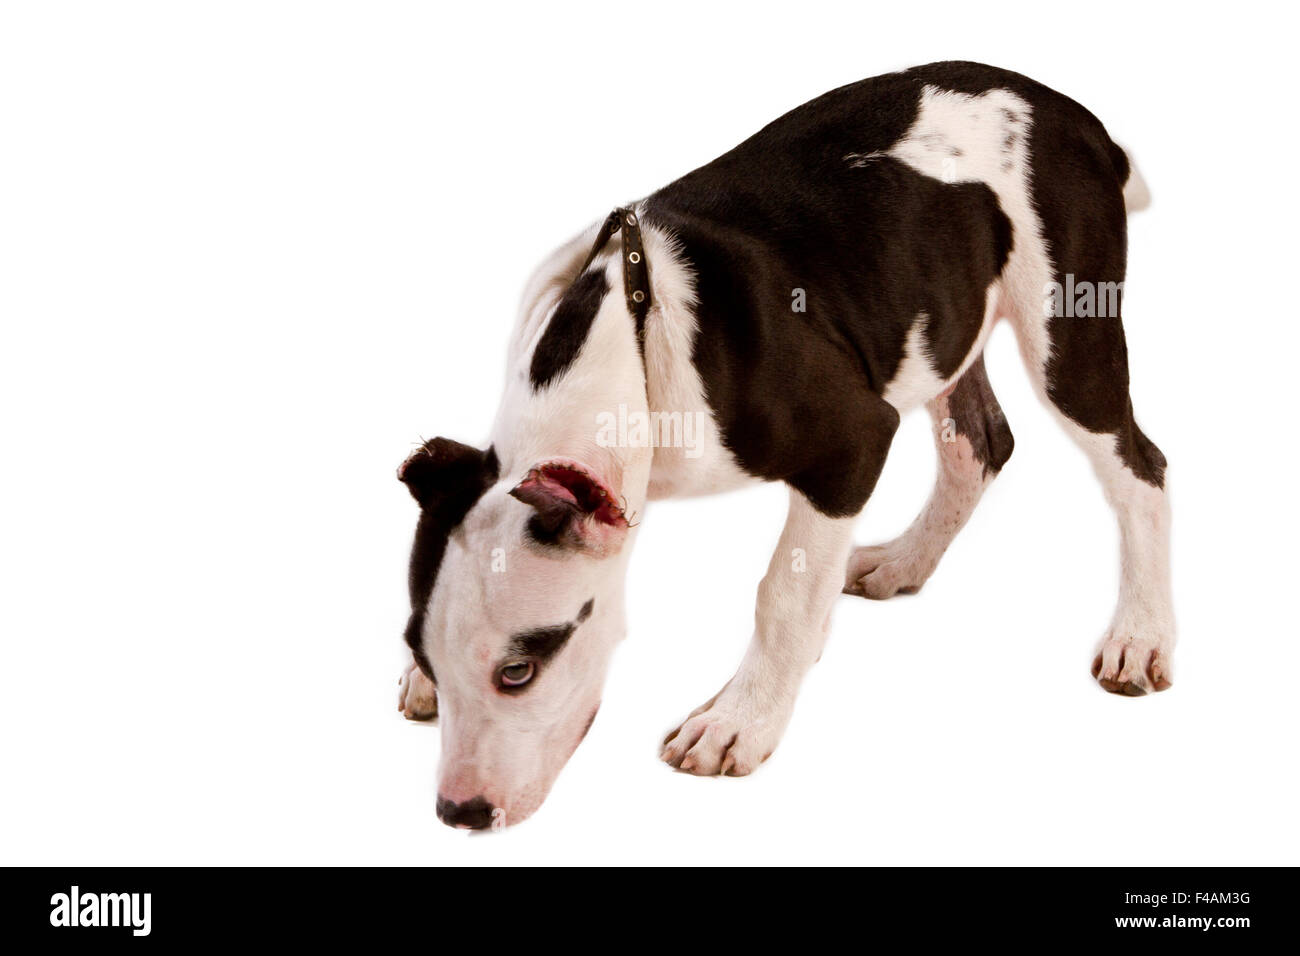 American Staffordshire terrier dog Banque D'Images